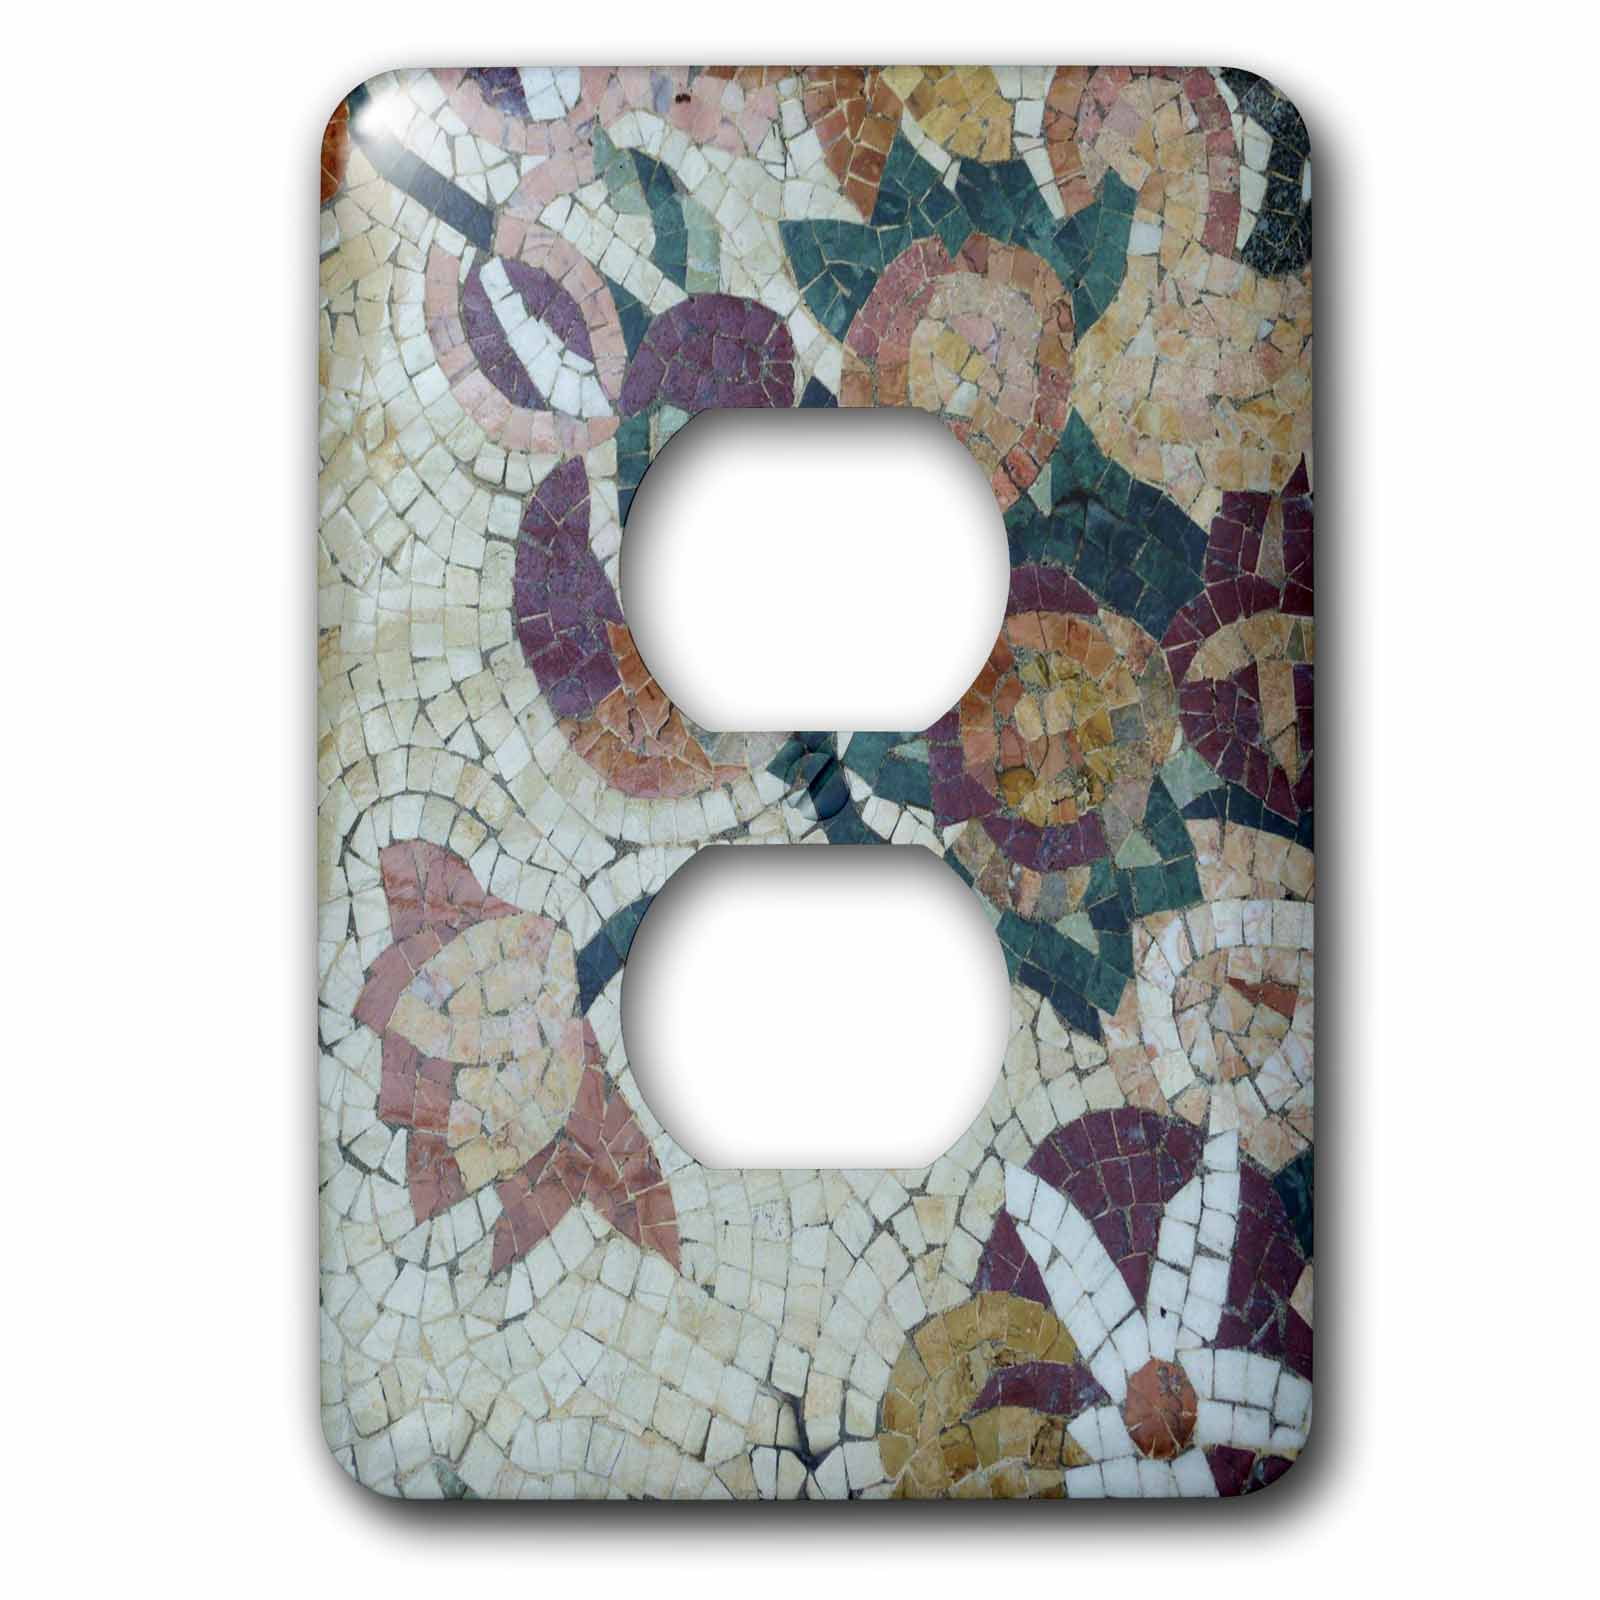 Multi-Color 3dRose lsp_29202_6 Earthy Seashells Outlet Cover